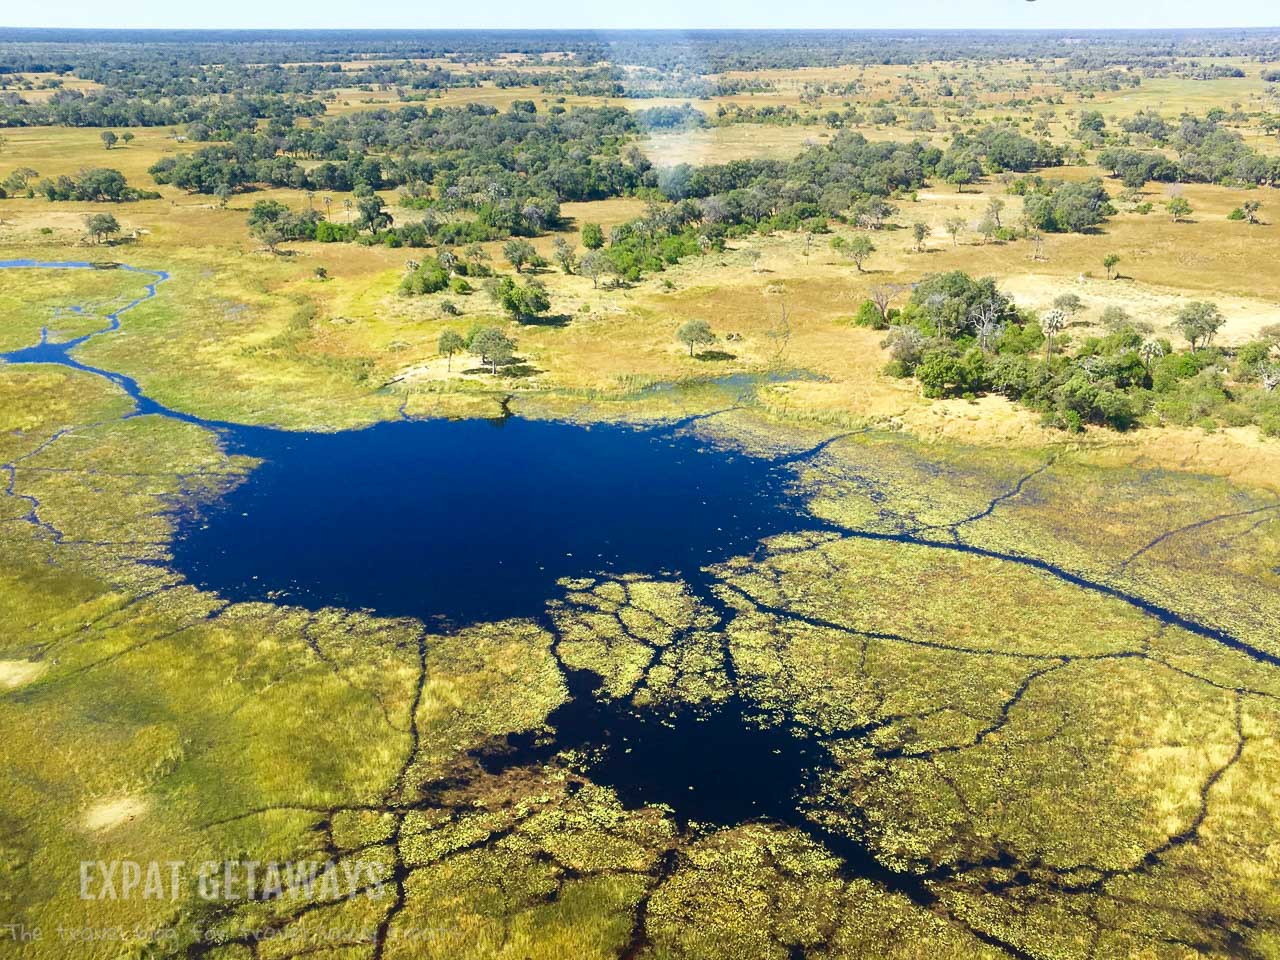 The first glimpse of the Okavango Delta, Botswana is from a scenic flight as you fly into Gunns Camp. Expat Getaways 2 Weeks in Southern Africa. 